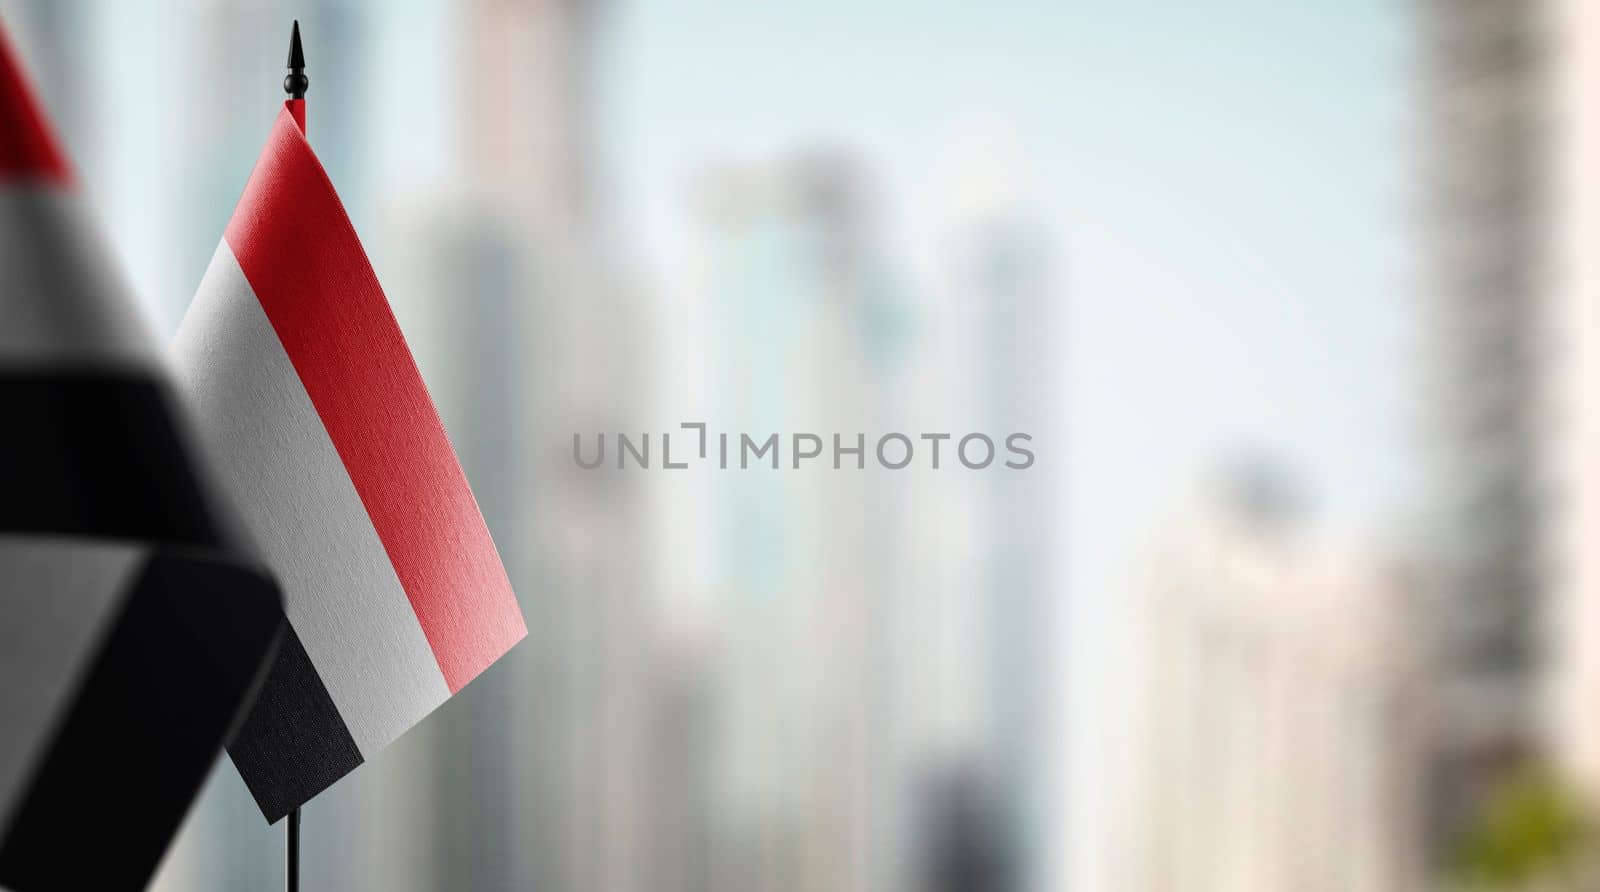 Small flags of the Yemen on an abstract blurry background by butenkow